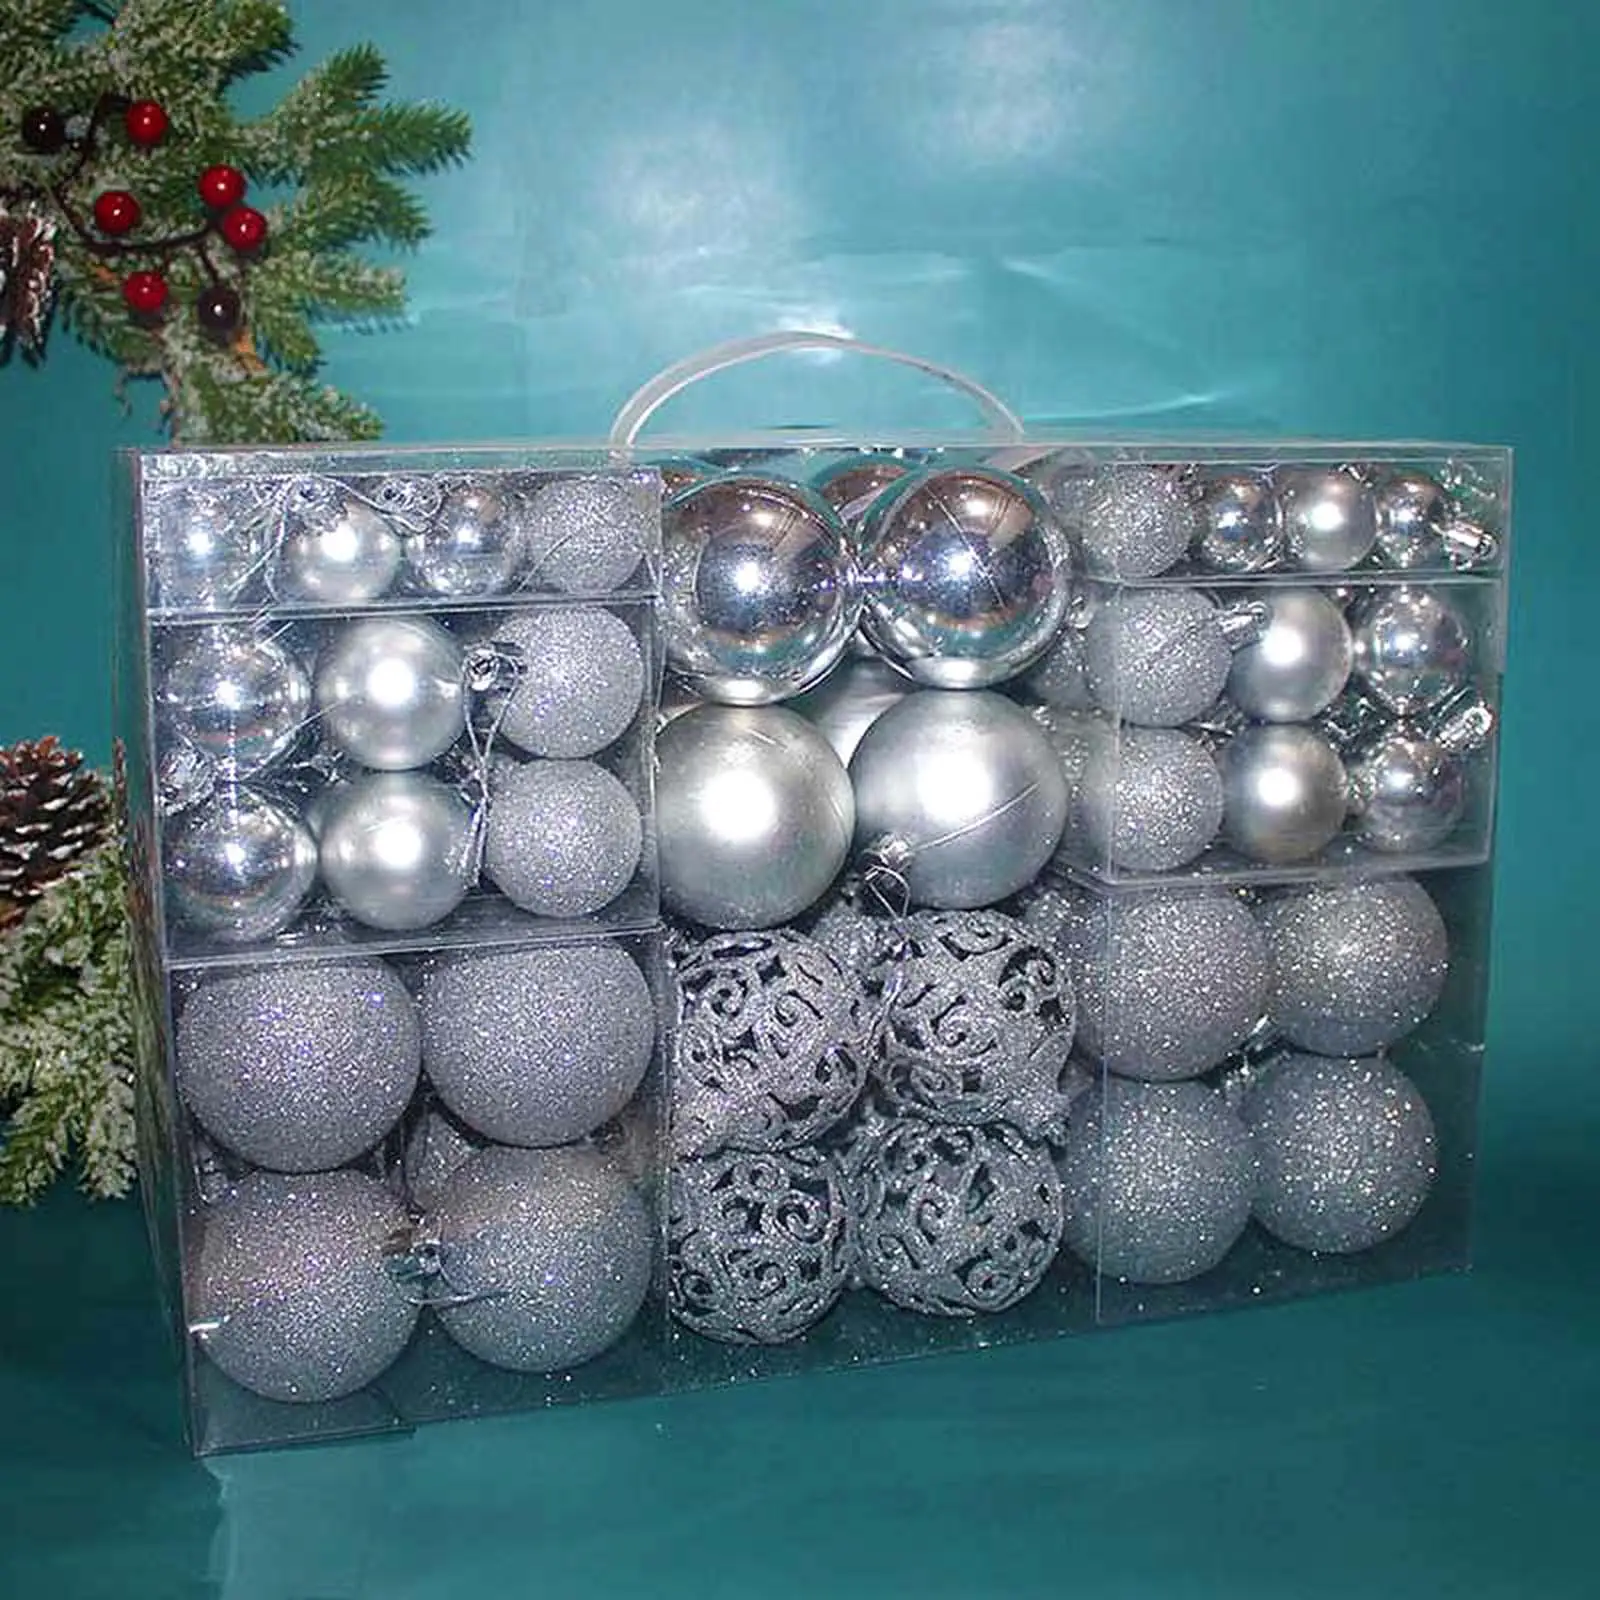 100Pcs Christmas Tree Ornaments Hanging Balls Baubles Xmas Tree Decorations with Lanyard for Indoor Holiday Decoration